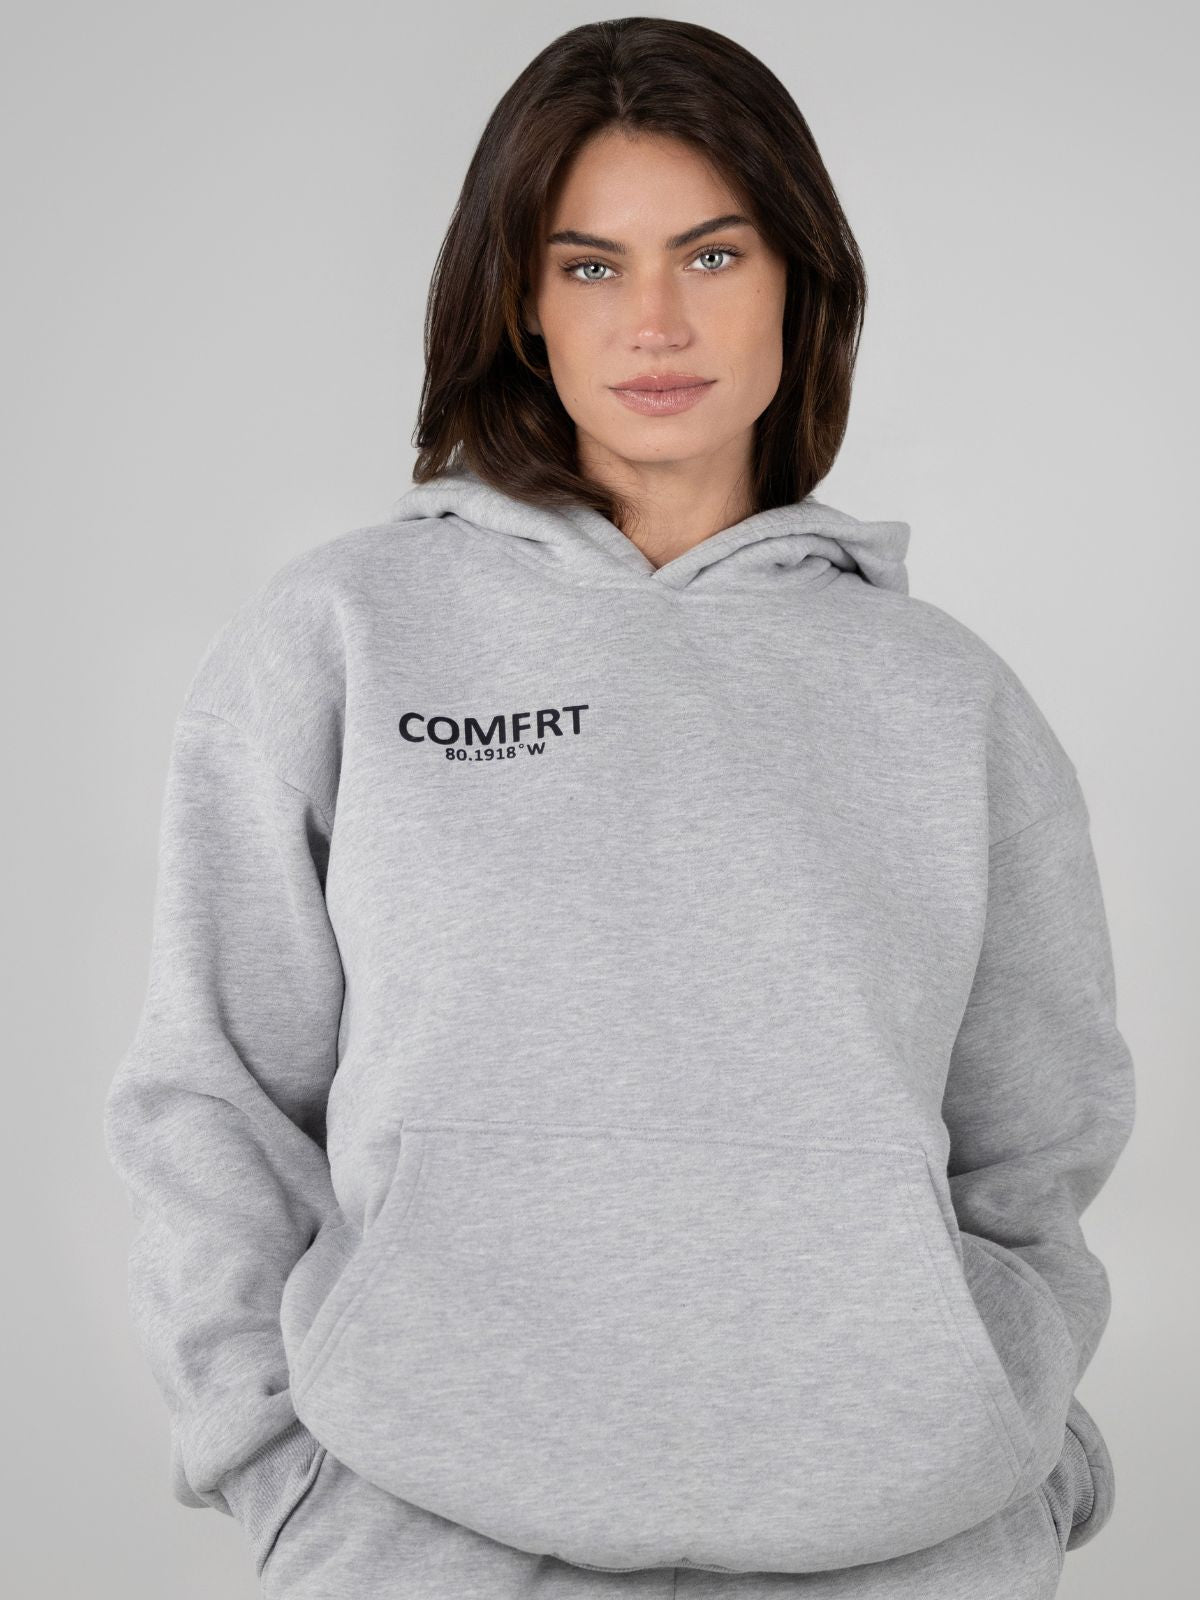 Comfrt  The Only Hoodie Worth Wearing